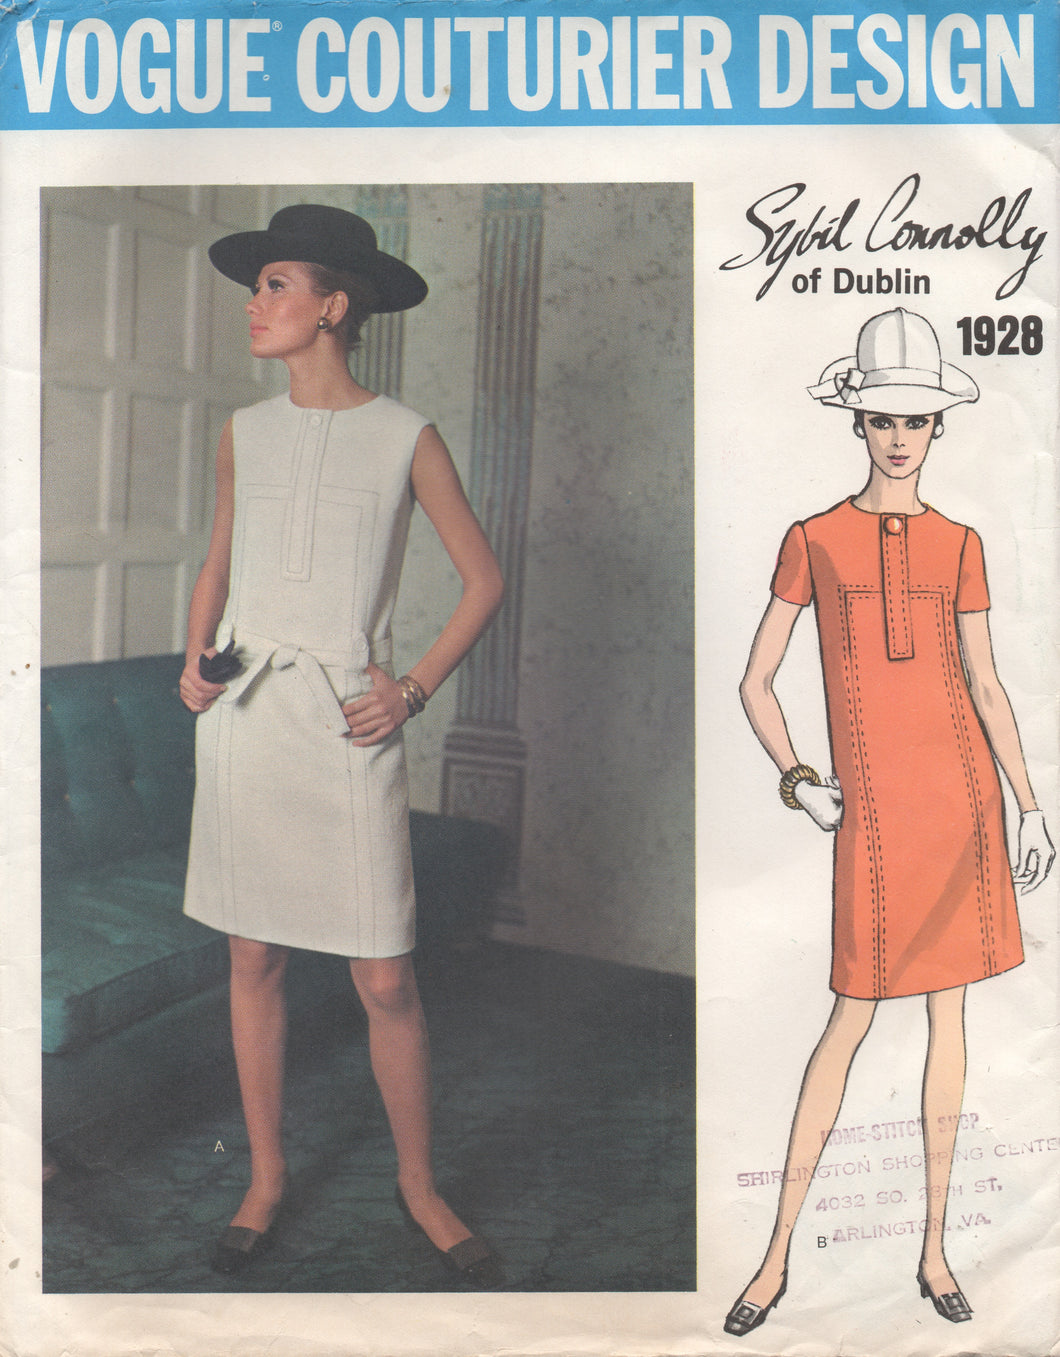 1960's Vogue Couturier Design - One Piece Dress with Band and Tab accents - Bust 32.5